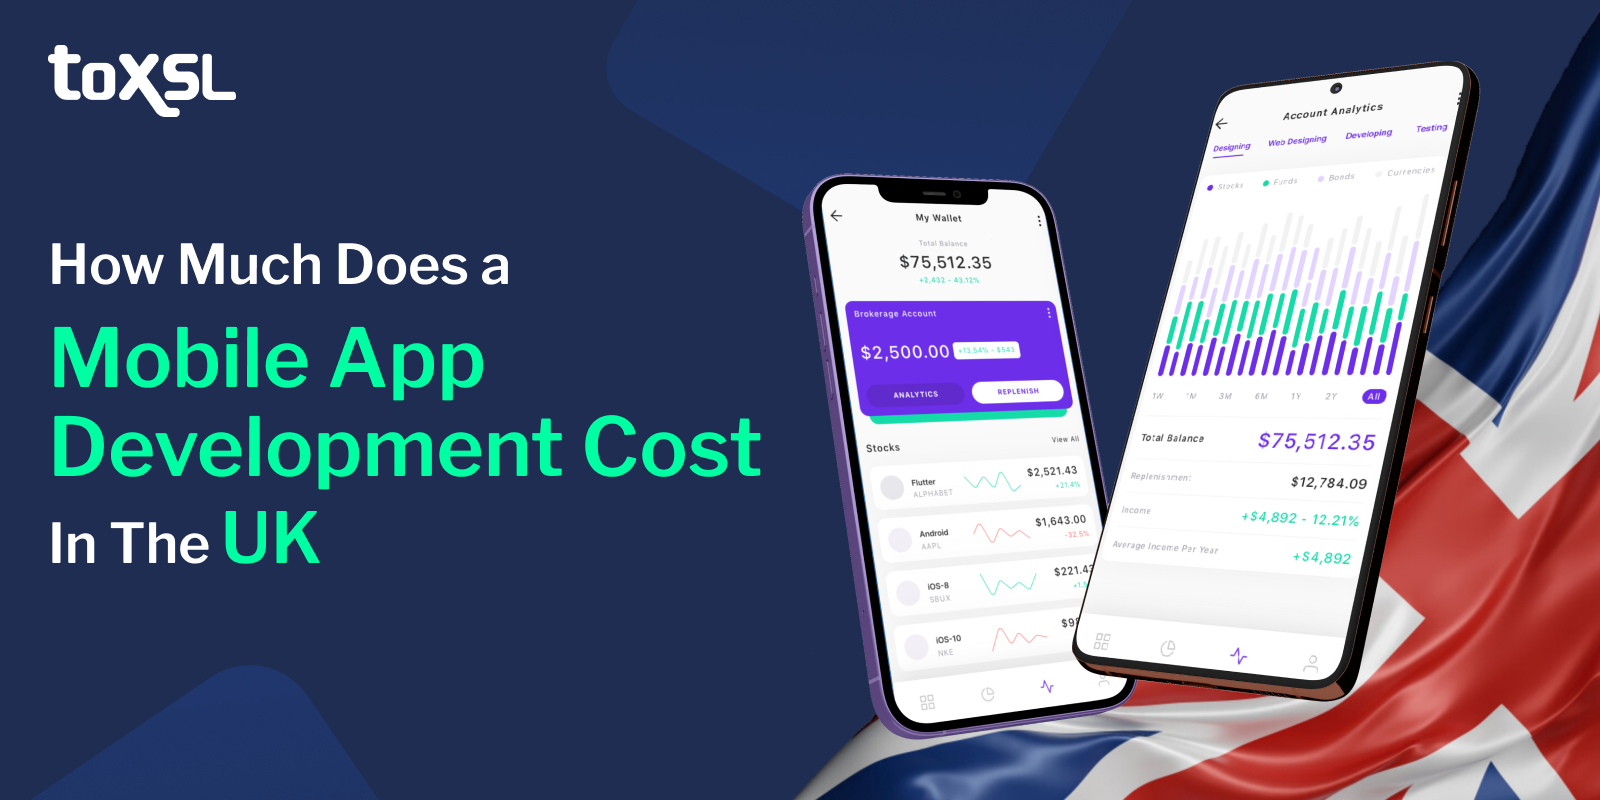 How Much Does Mobile App Development Cost in The UK?